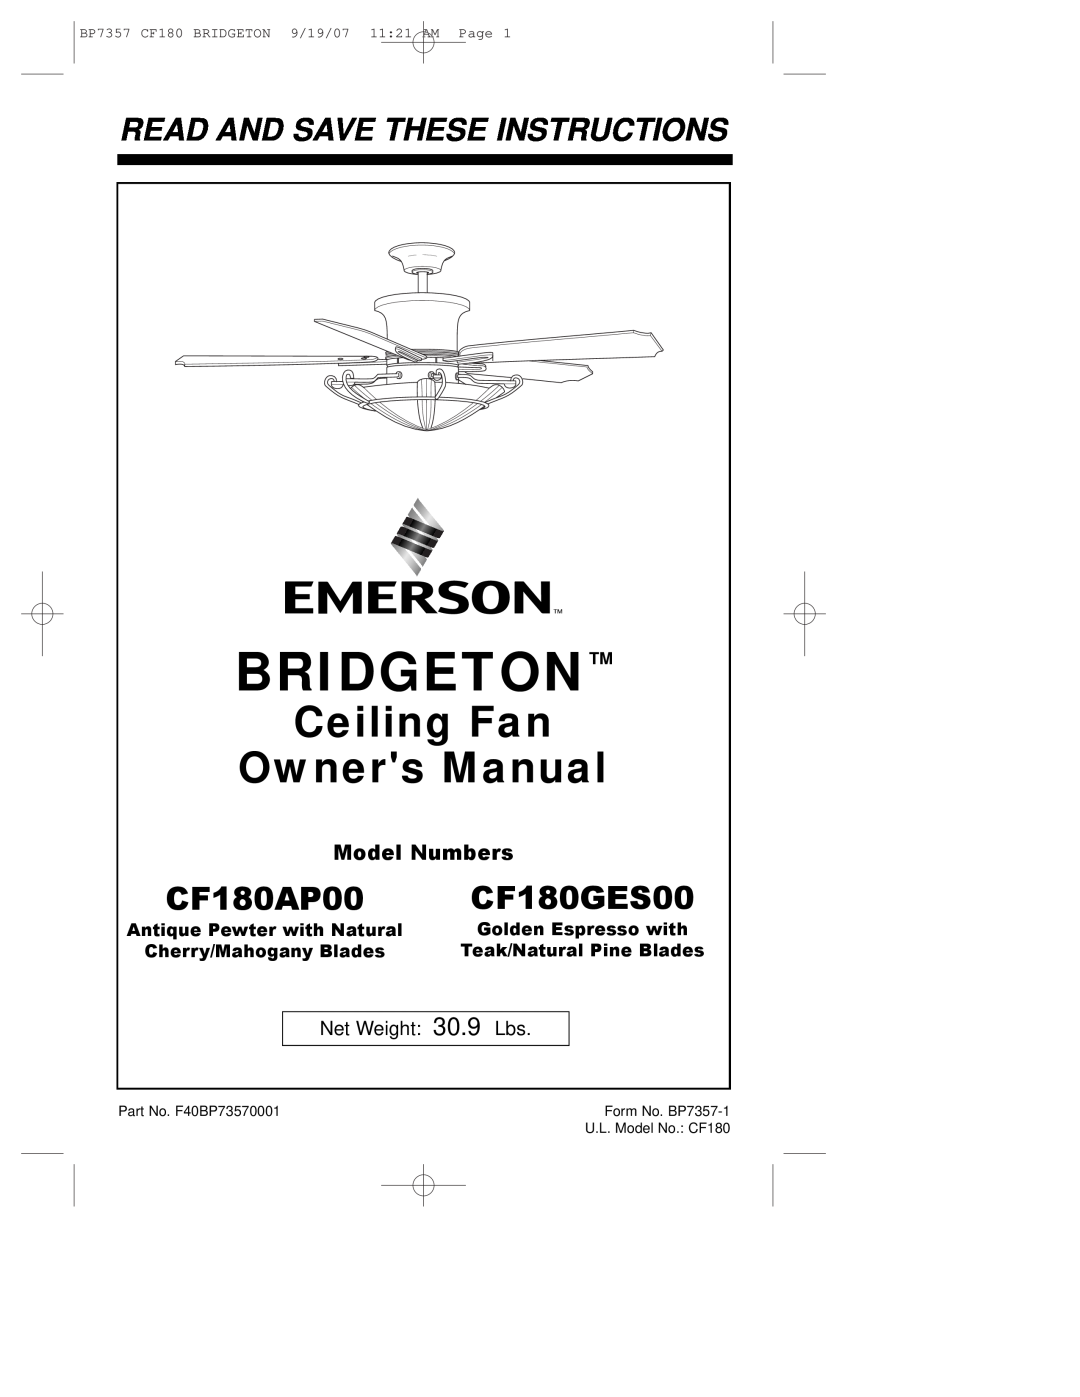 Emerson CF180AP00 owner manual Bridgeton, CF180GES00, Read And Save These Instructions, Model Numbers, Net Weight 30.9 Lbs 